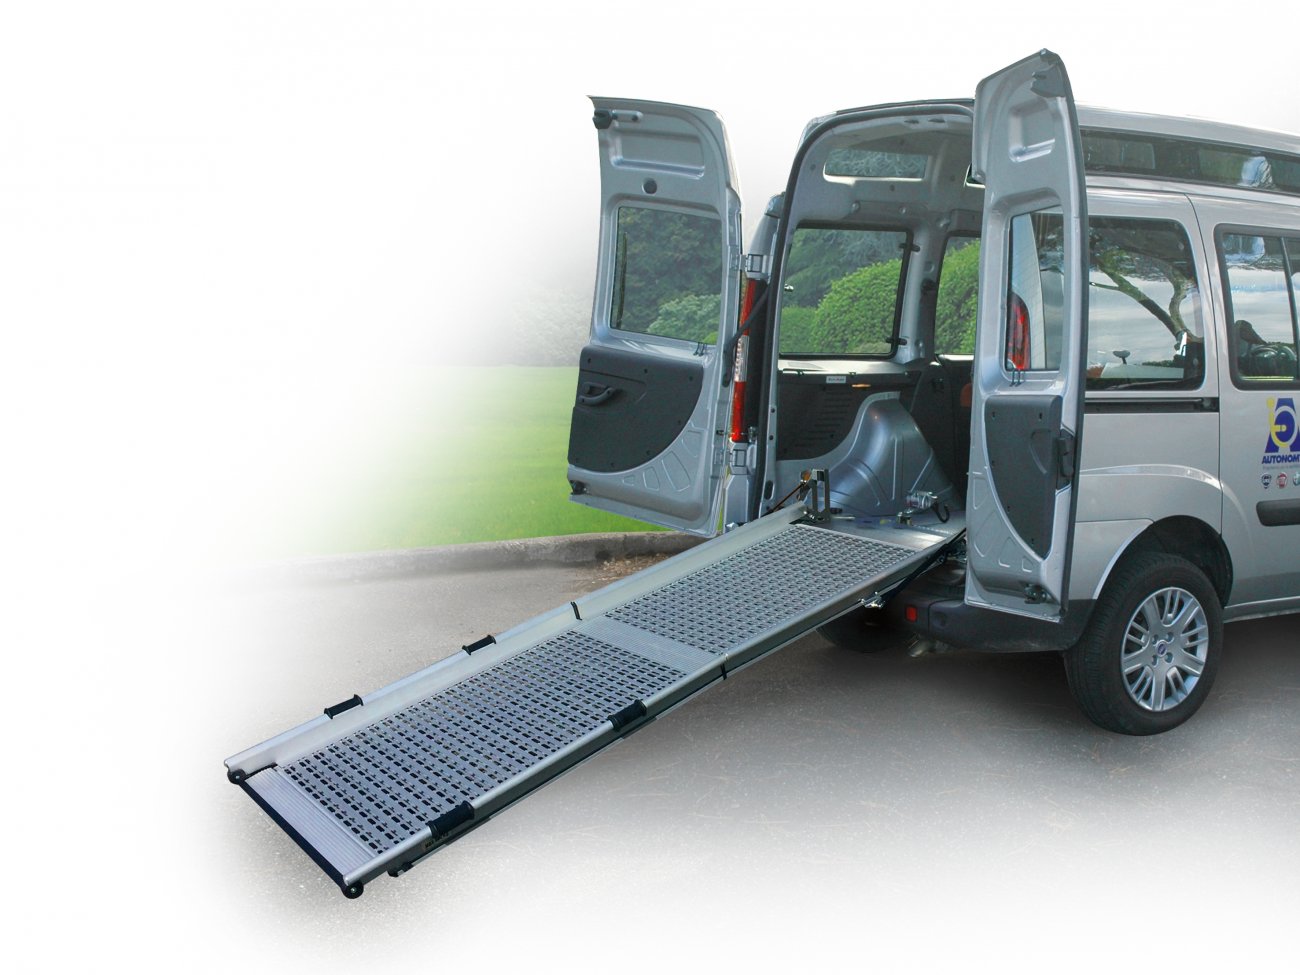 Mobility Networks to launch new world-class ‘Flexi’ range of accessible vehicle solutions at Mobility Roadshow 2016